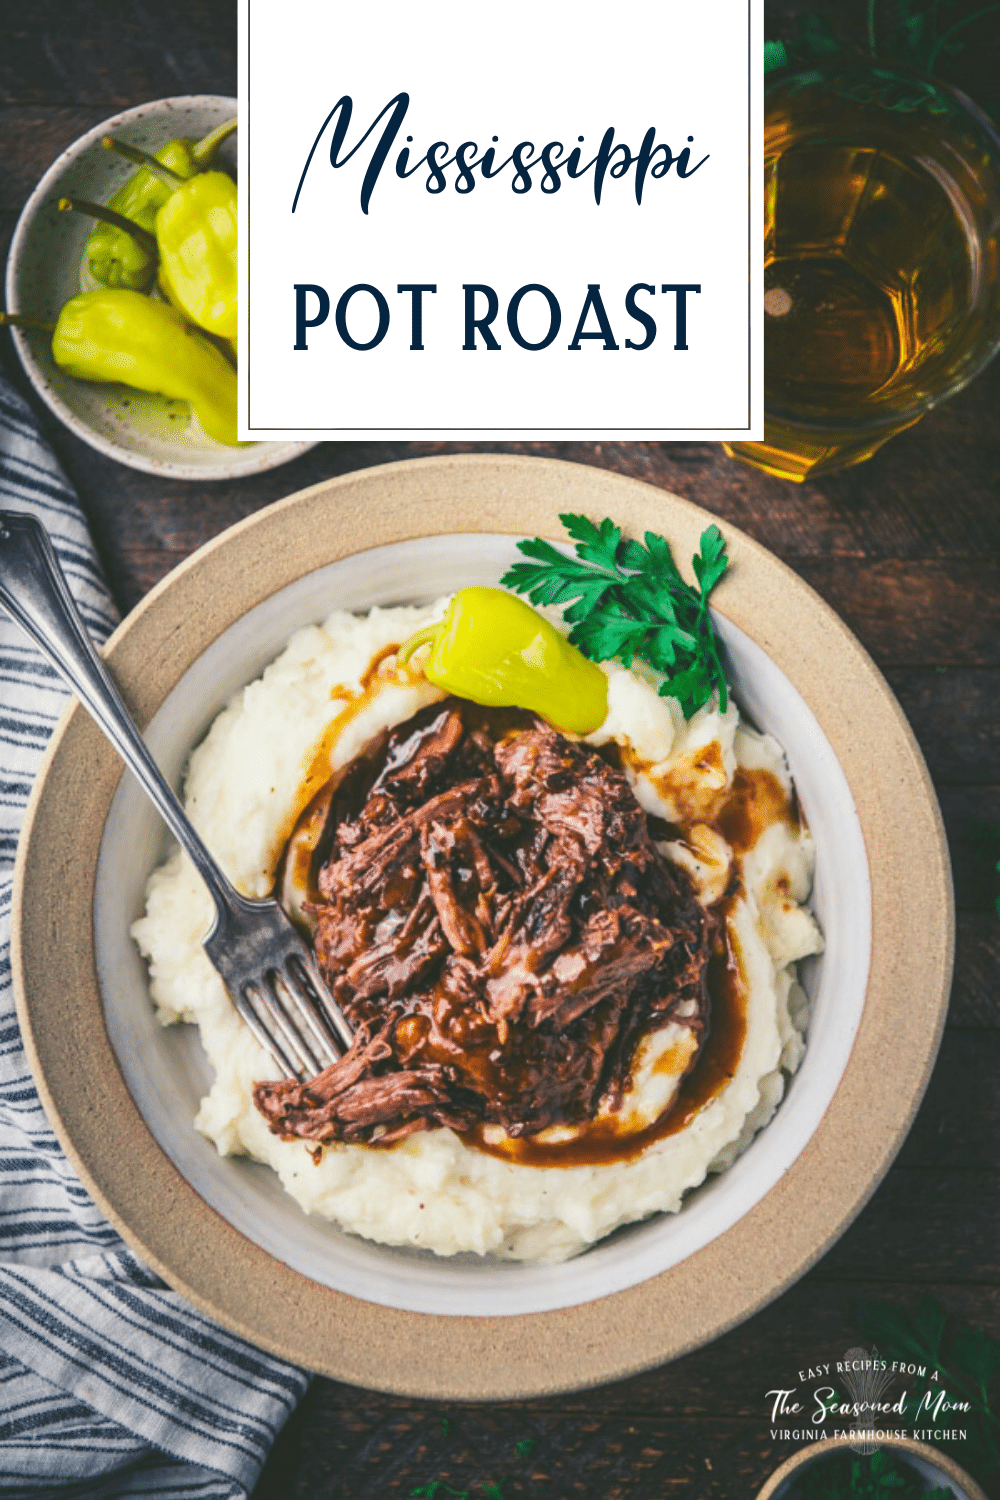 Overhead shot of a bowl of mississippi pot roast with text title overlay